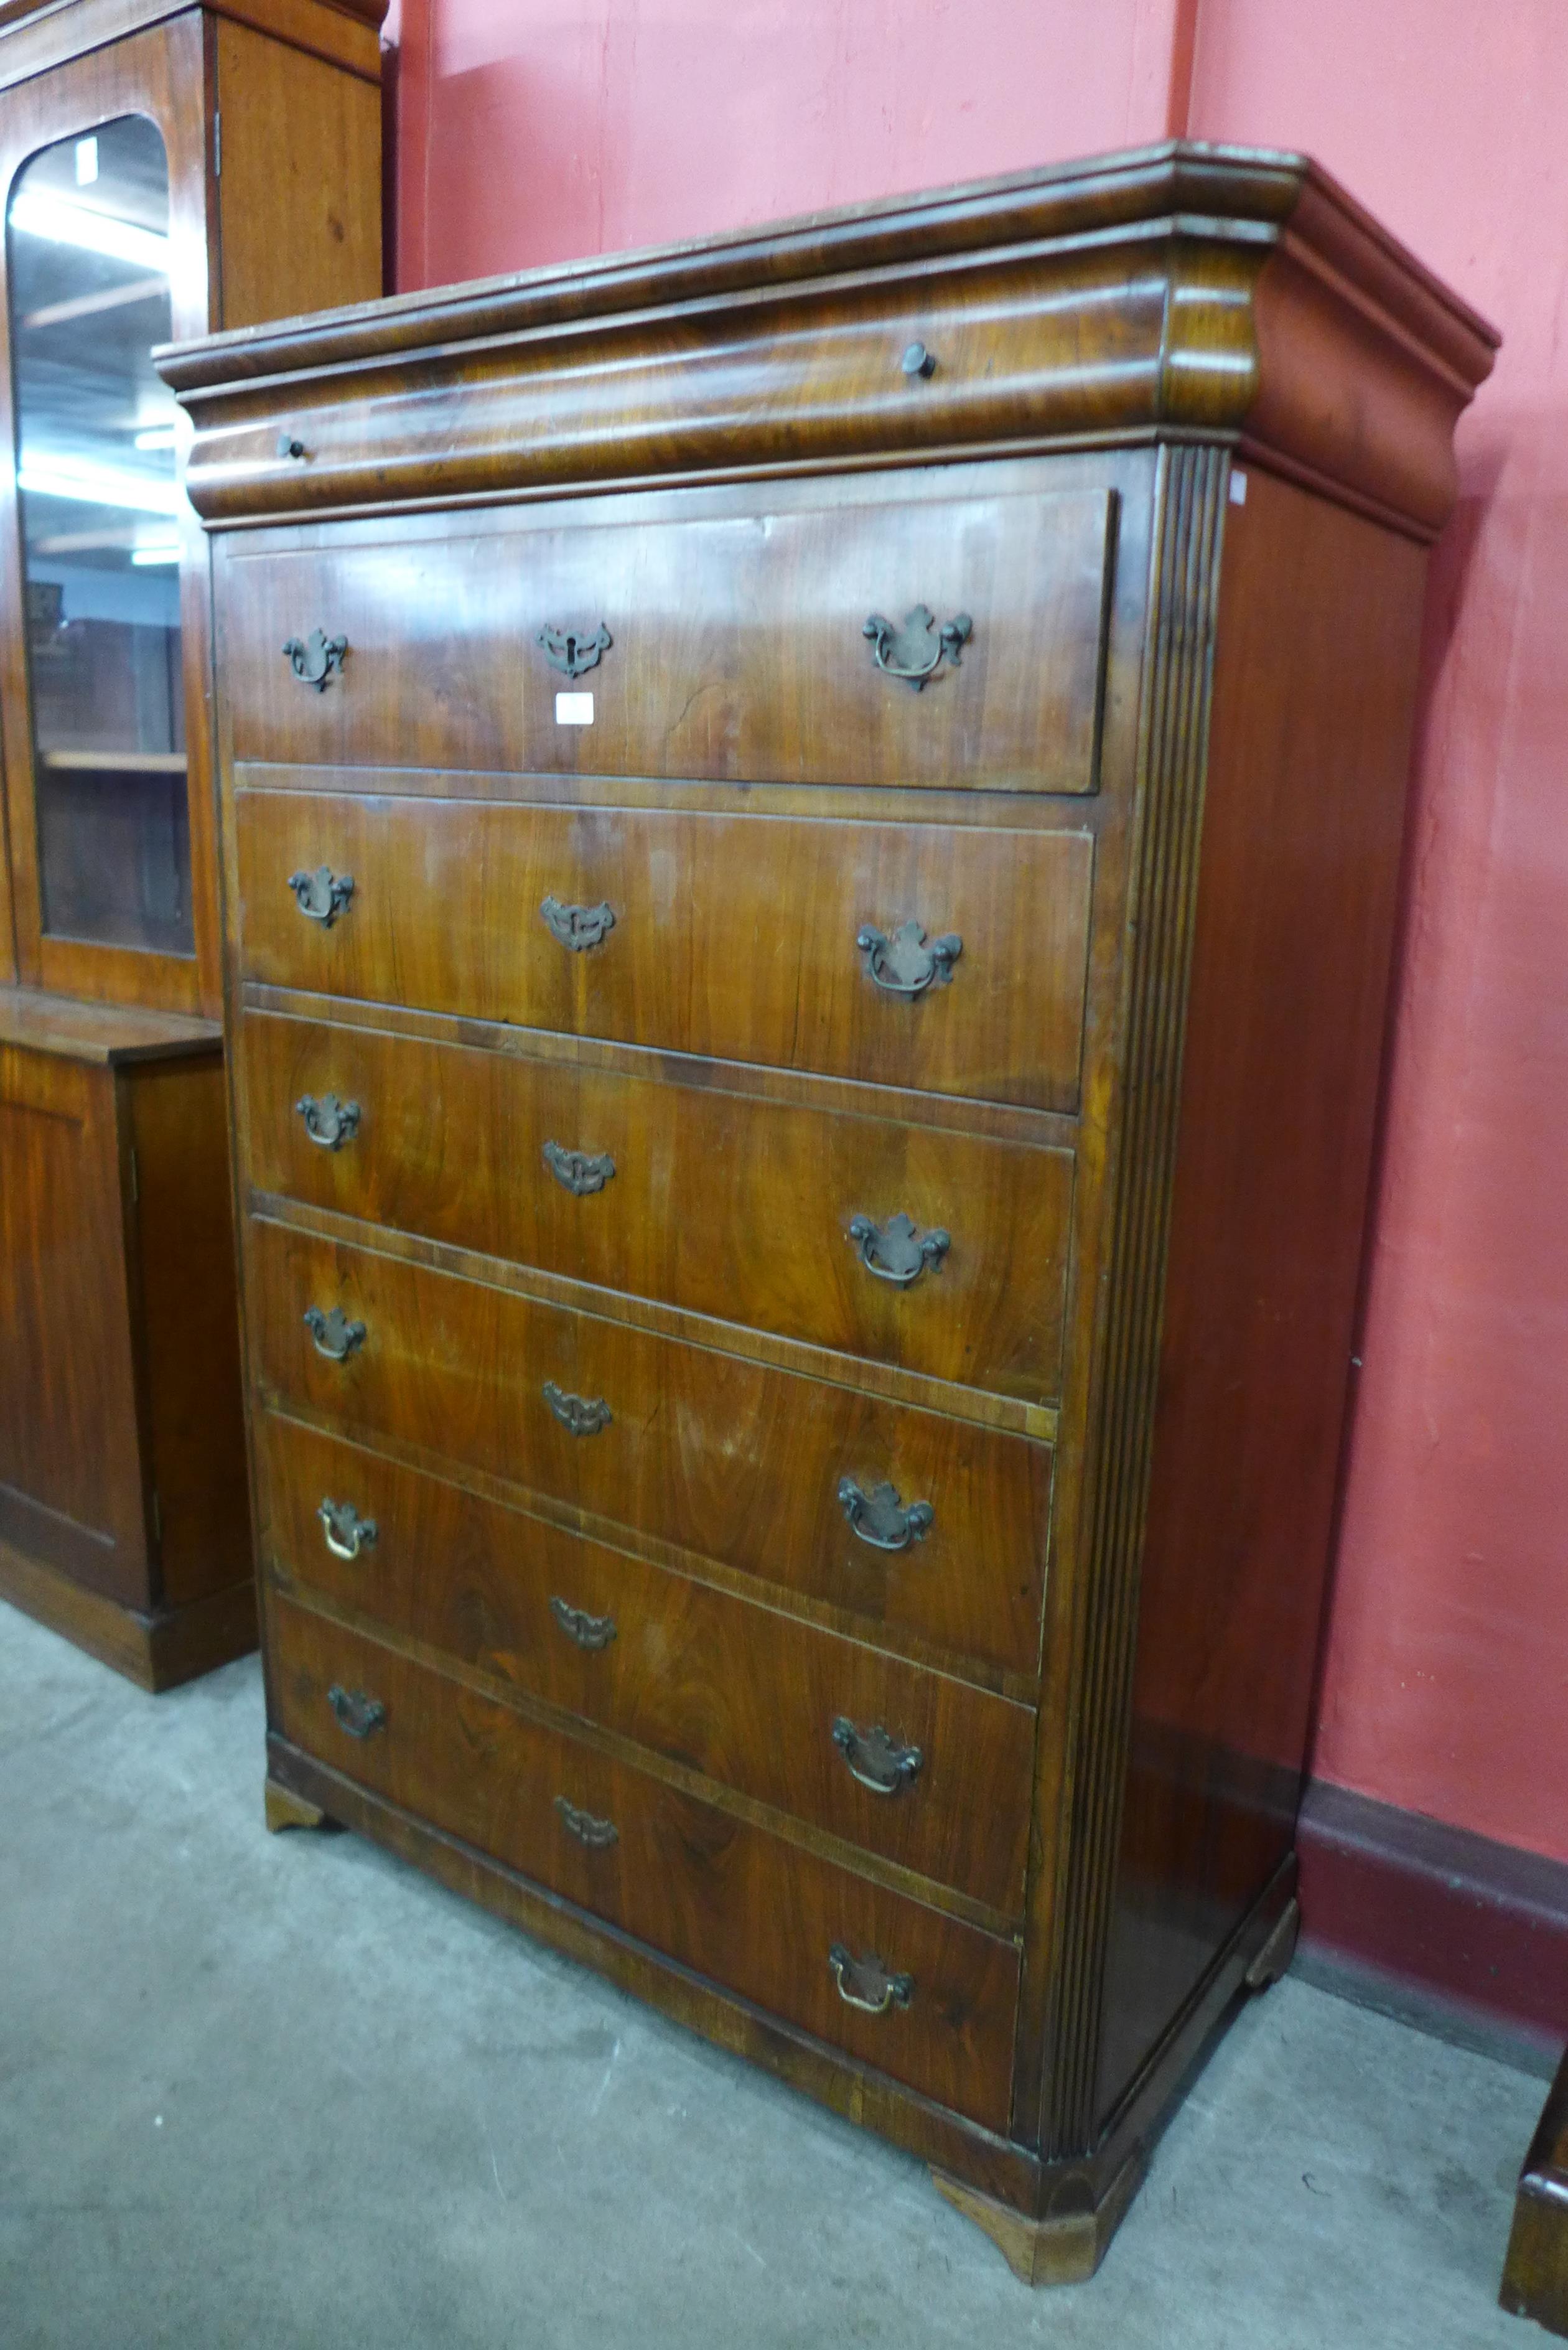 A 19th Century French mahogany semainier chest of drawers